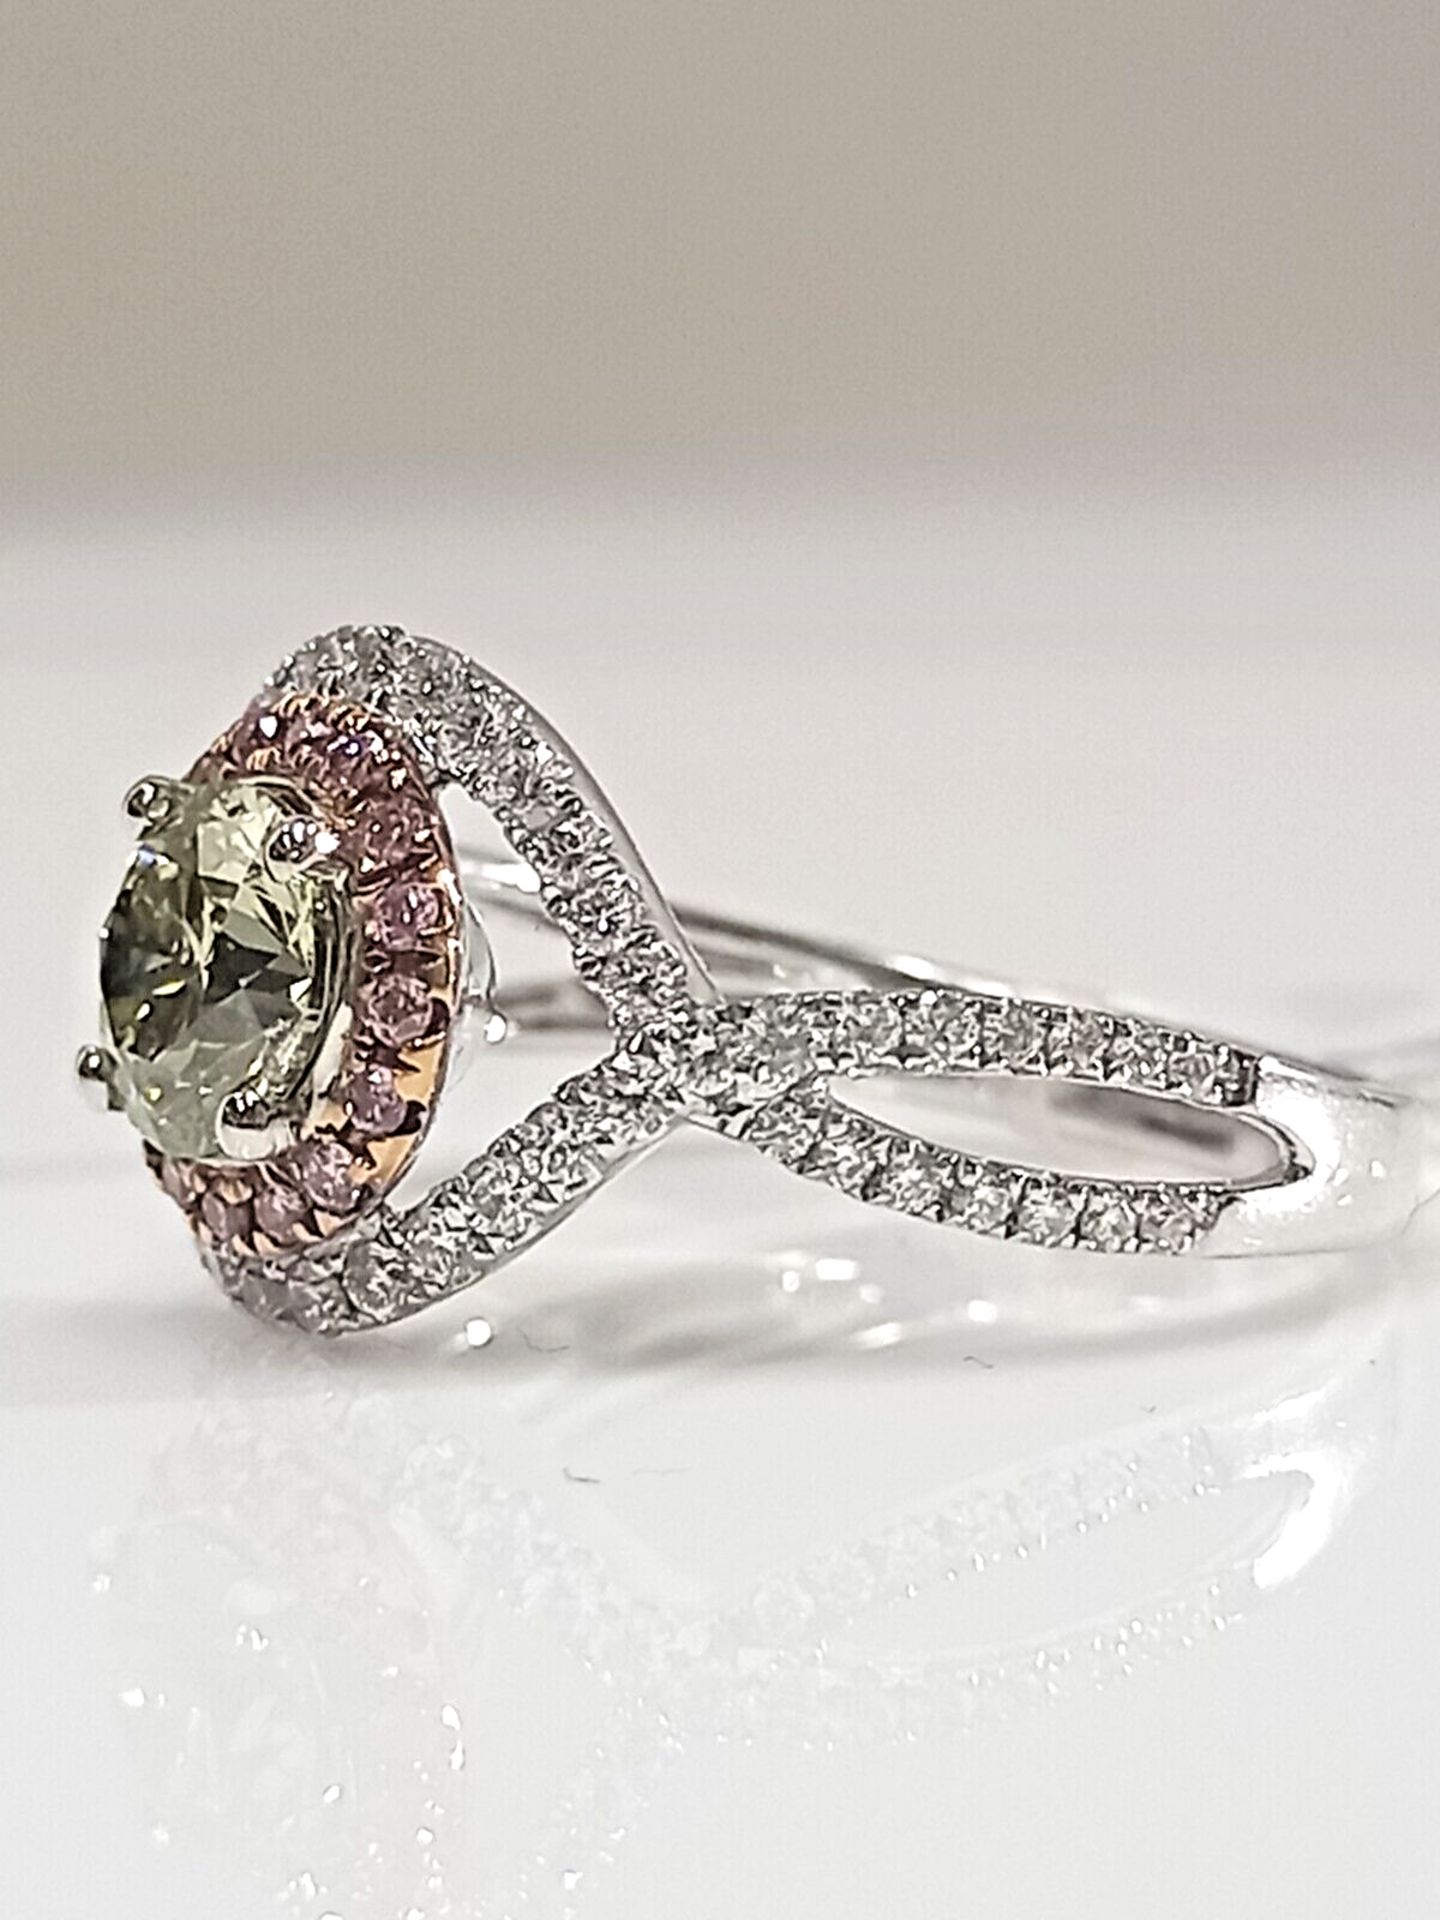 EXQUSITE 1.36CT GREEN/PINK/WHITE DIAMOND HALLO SET ENGAGEMENT RING + VALUATION CERT OF £12995 - Image 2 of 9